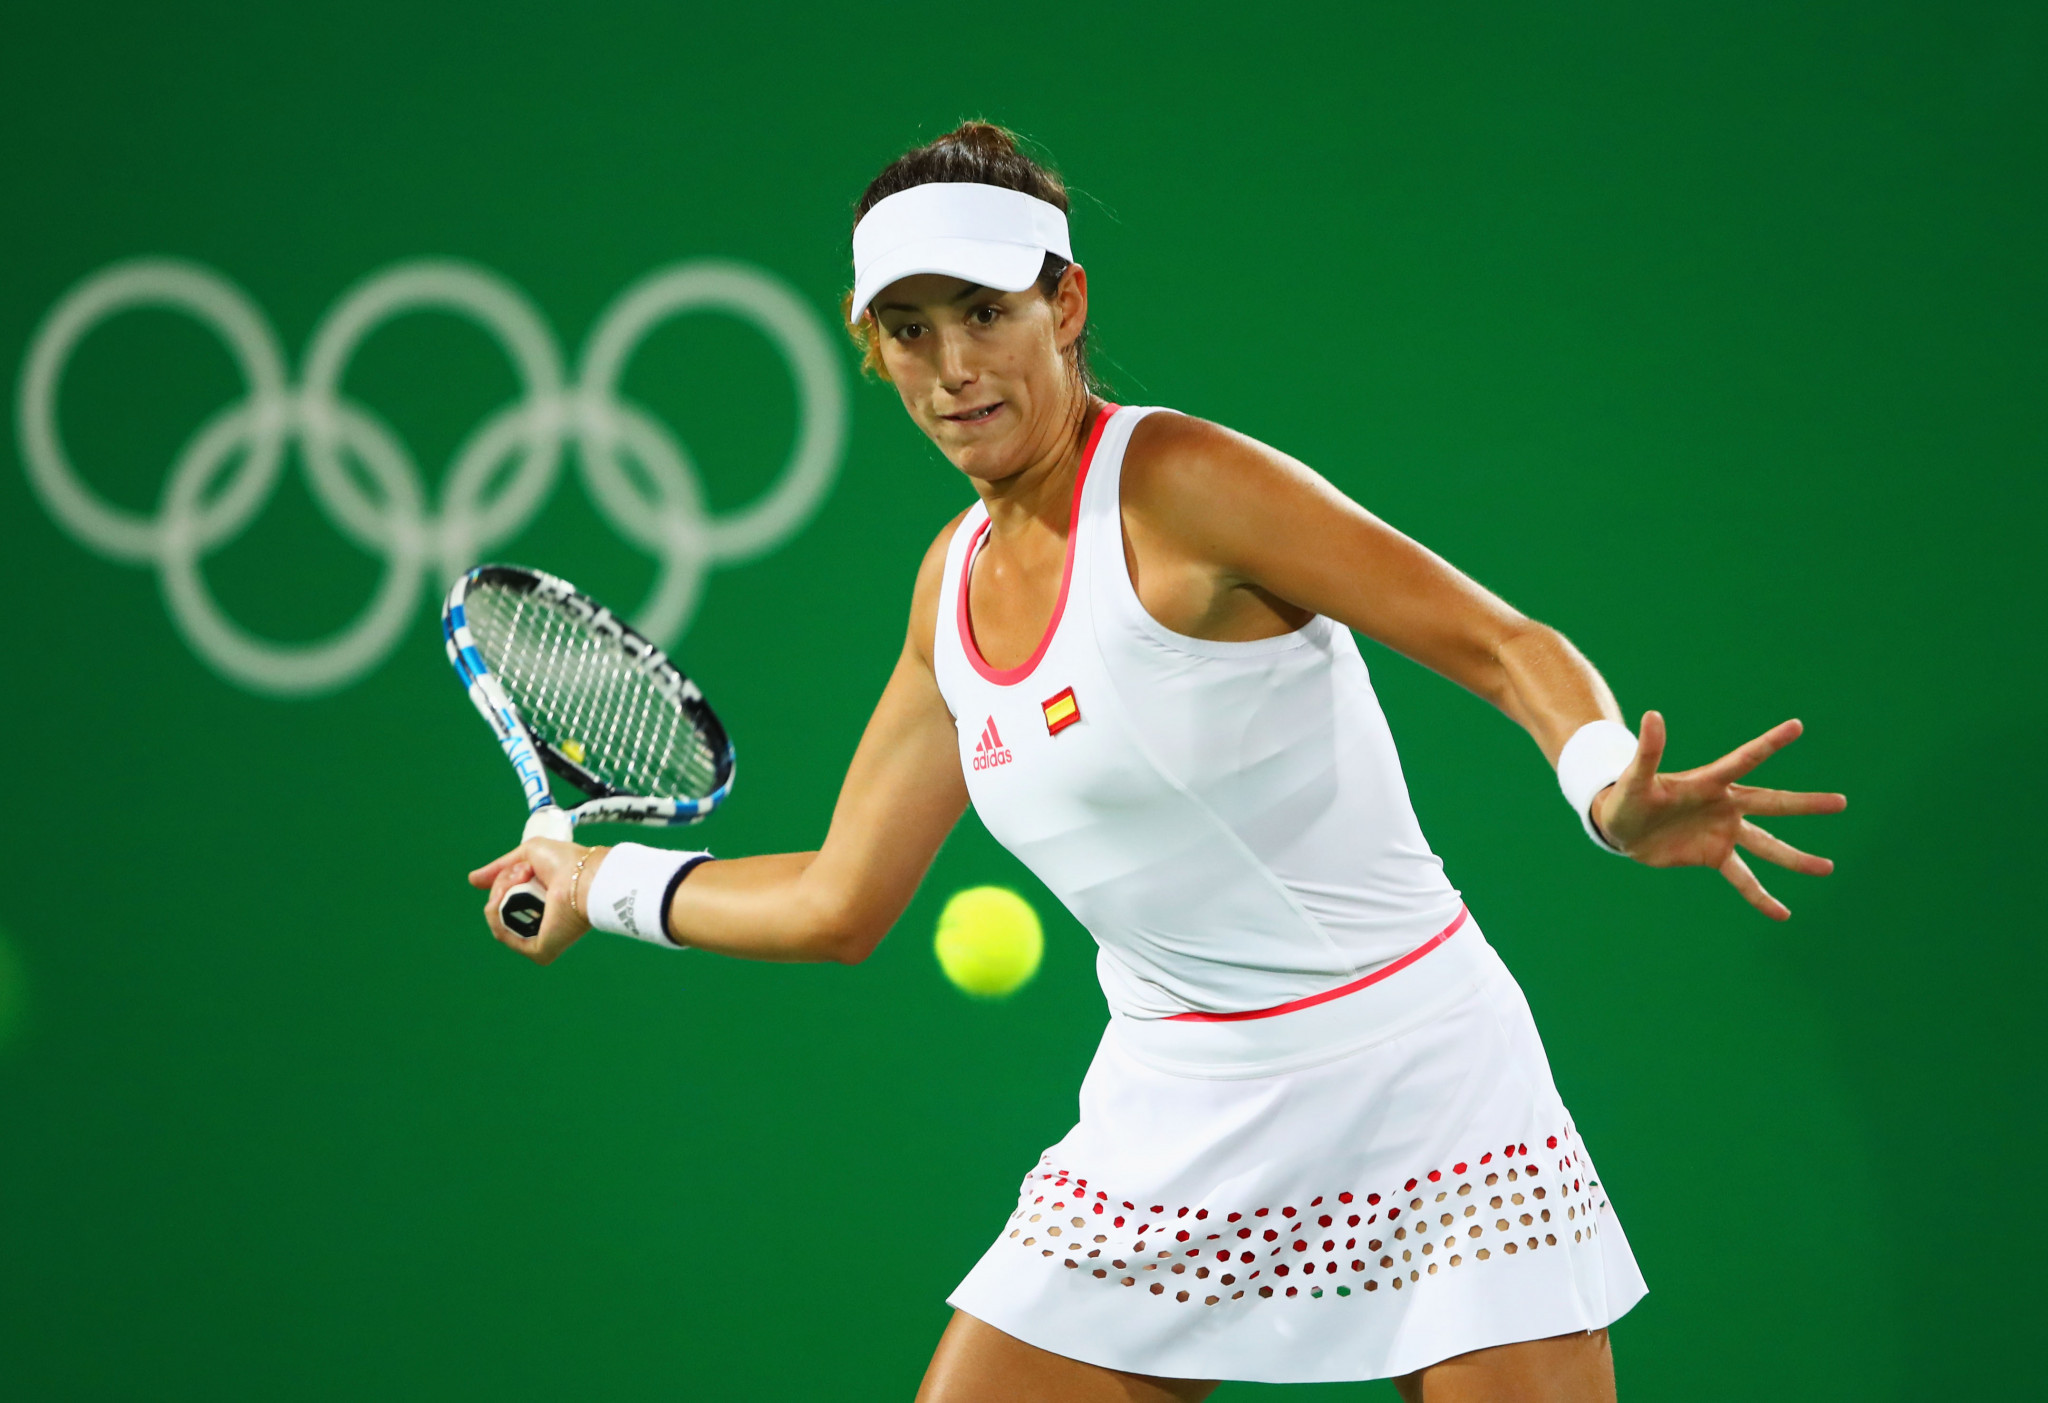 Garbiñe Muguruza reached the third round of the women's singles in her previous Olympic appearance at Rio 2016 ©Getty Images